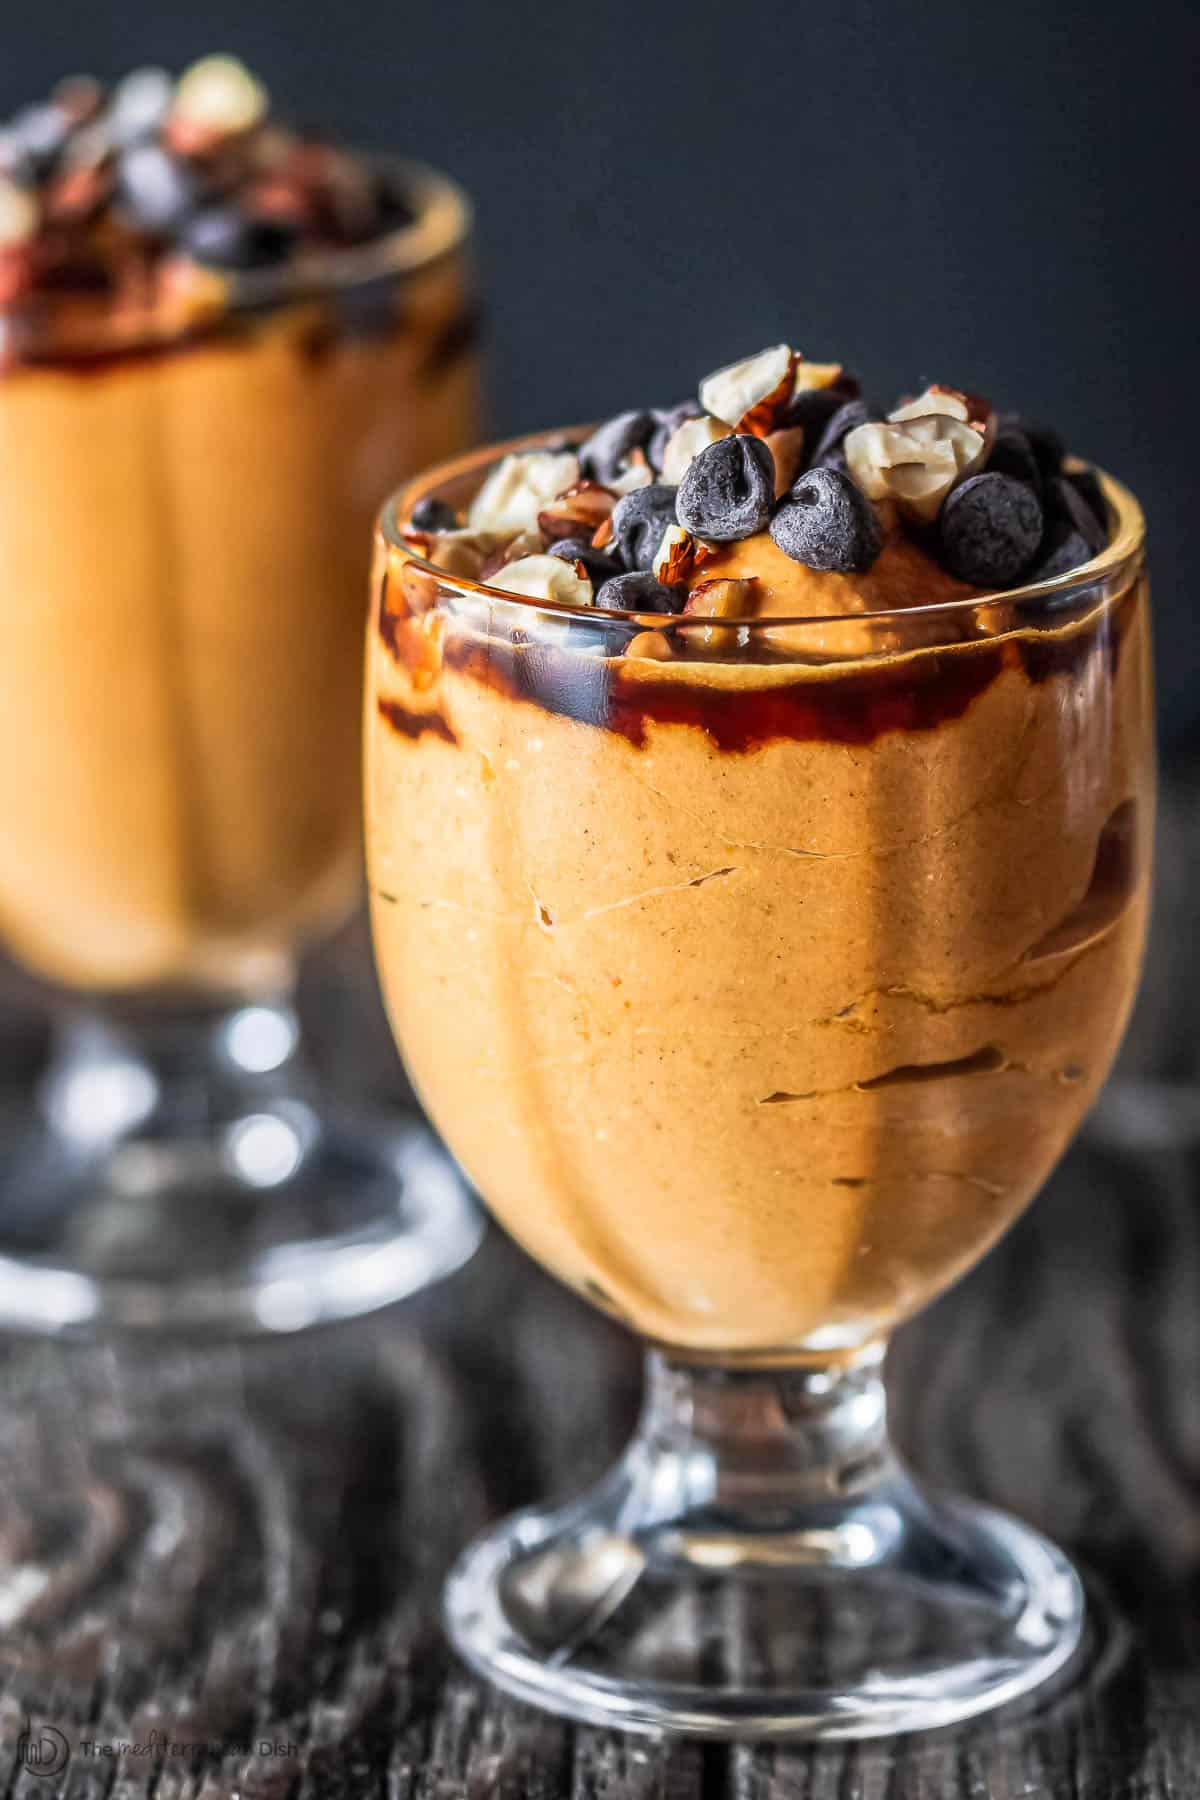 Pumpkin parfait served in small goblets, tipped with chocolate chips and nuts